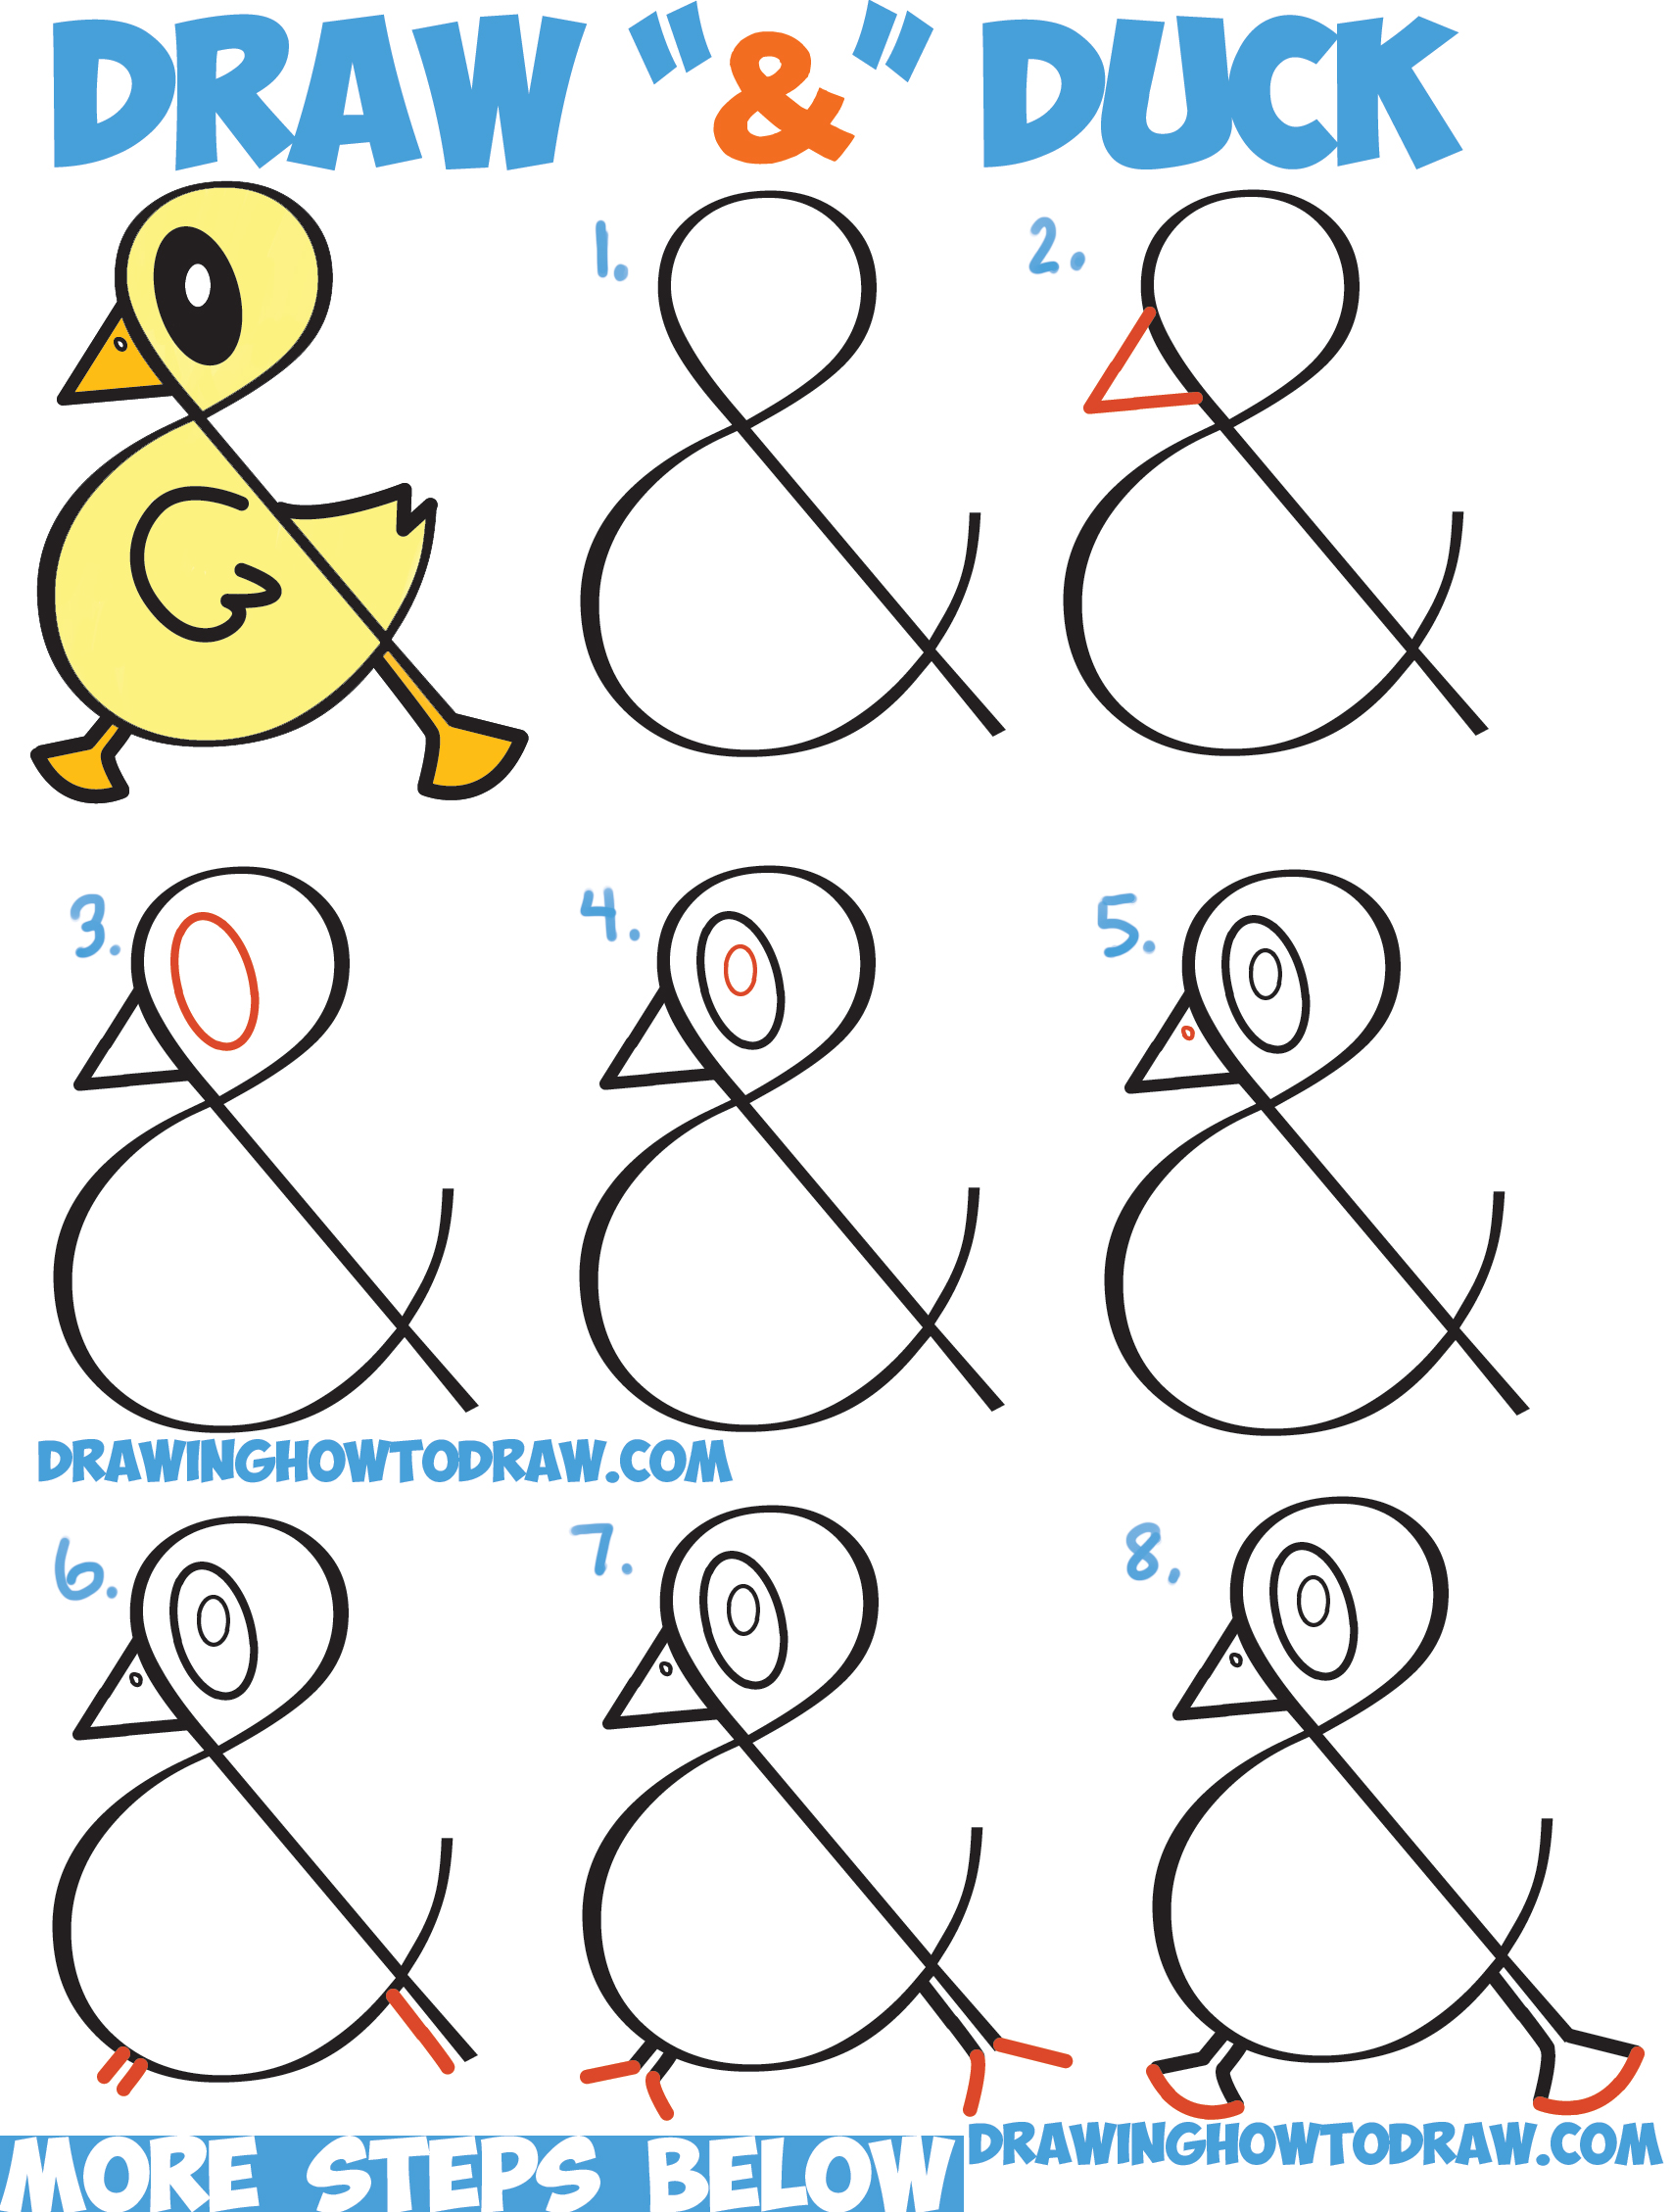 How to Draw a Cute Cartoon Duck from Ampersand Symbol - Easy Step by Step Drawing Tutorial for Kids